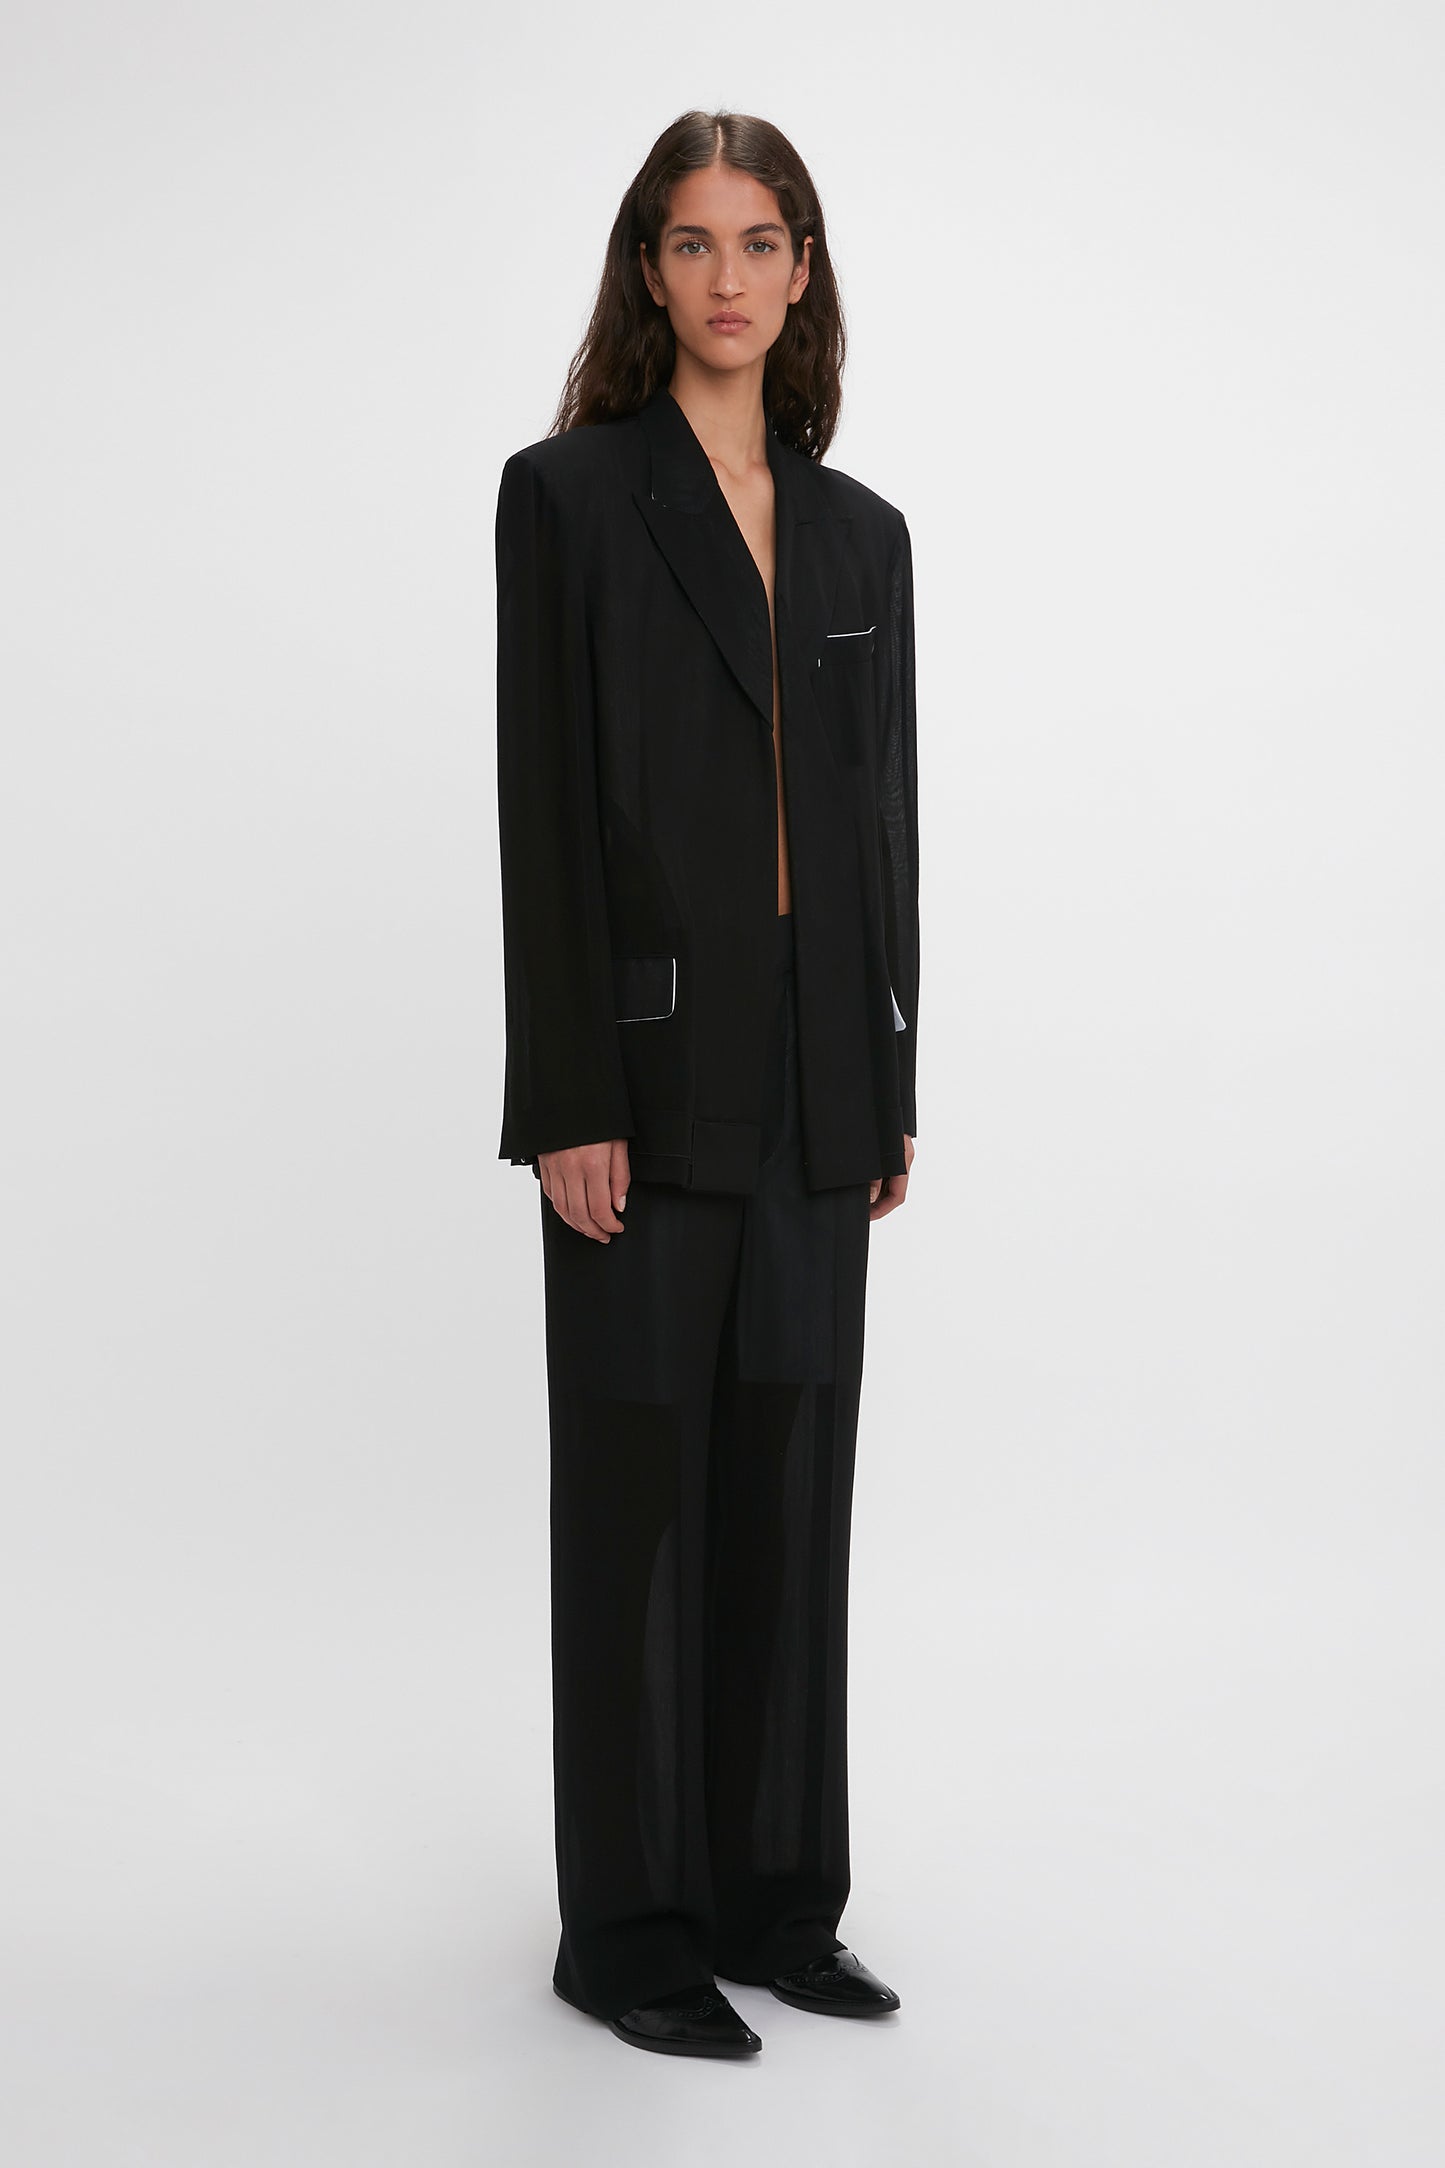 A woman in a Victoria Beckham Fold Detail Tailored Jacket In Black and wool trousers, standing against a white background.